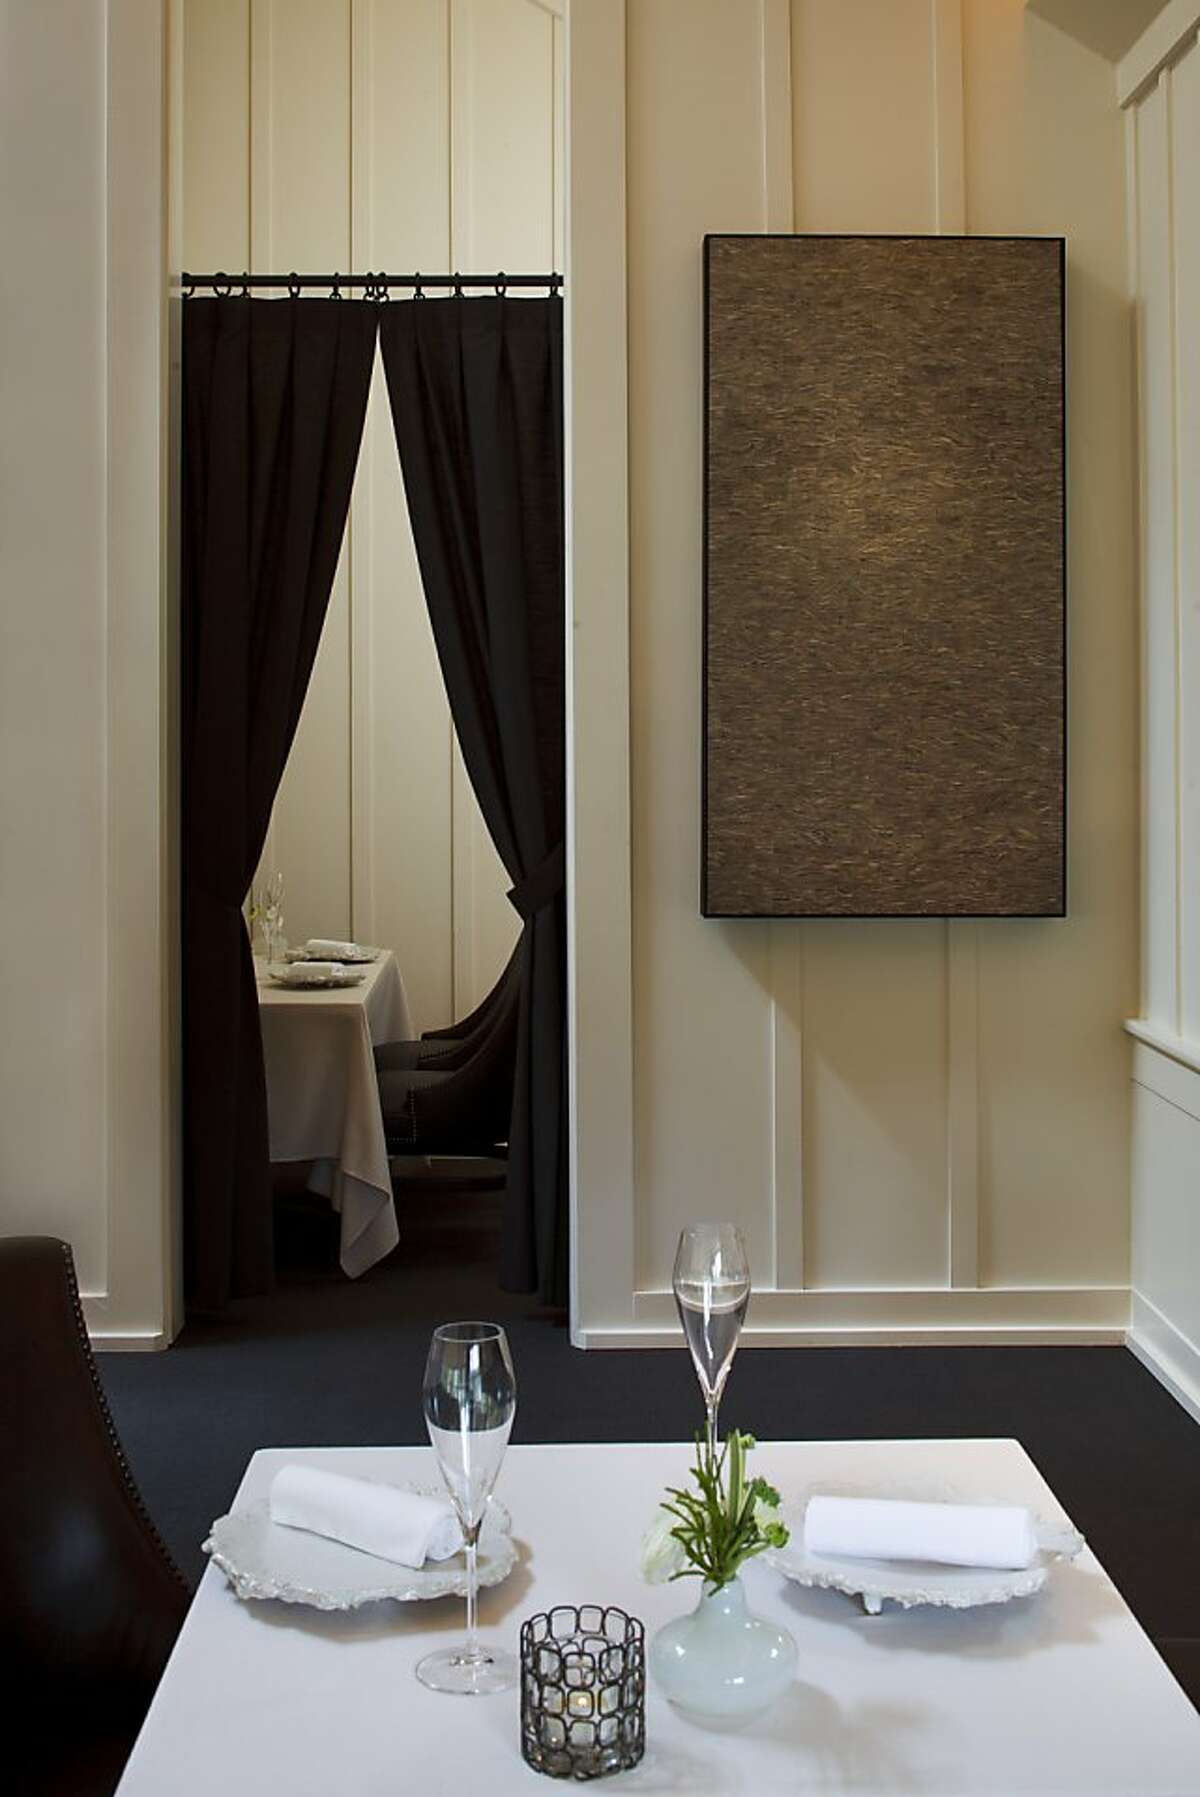 Artwork by Jonah Ward, known as wasp nest, hangs in the main dining room of the Meadowood Resort dining room. The small, private dining area can be seen through the parted curtains.